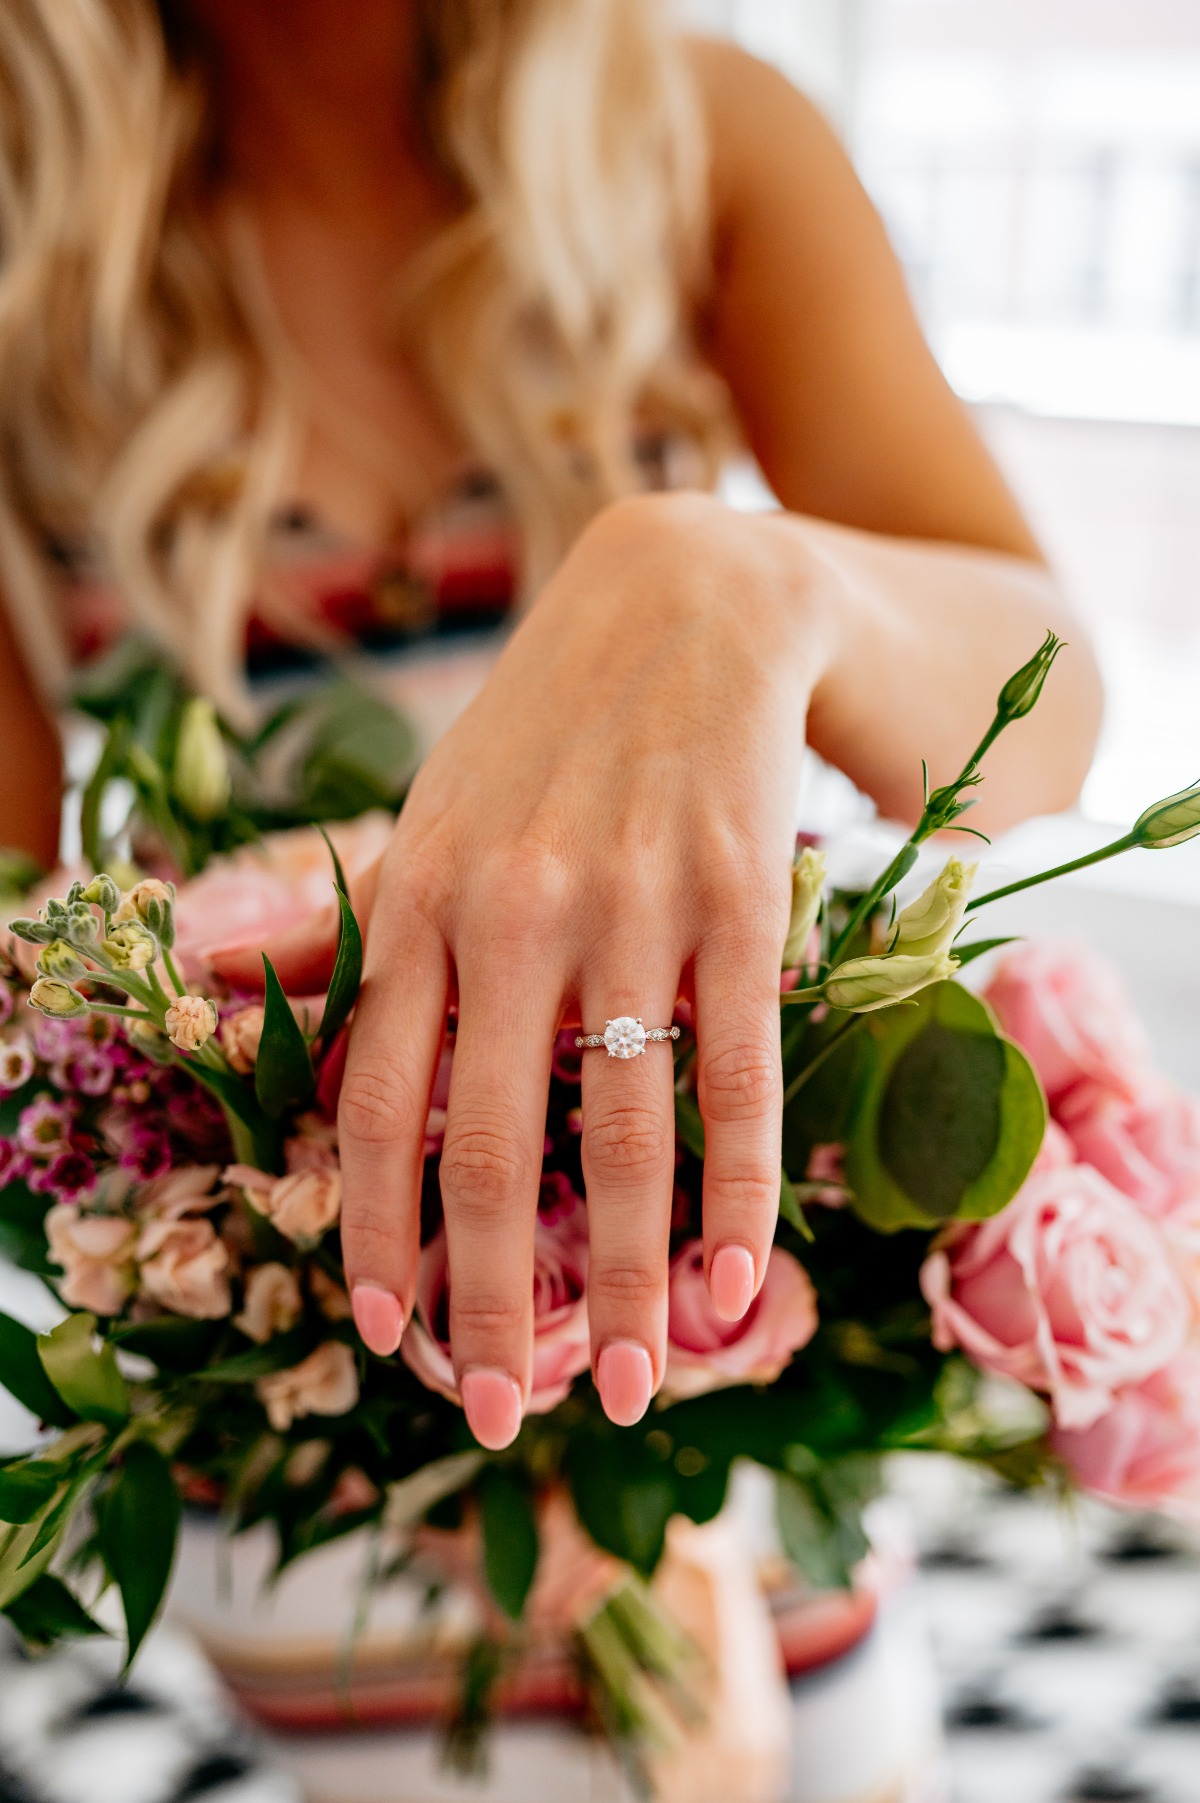 A Surprise Proposal Disguised As A Styled Shoot